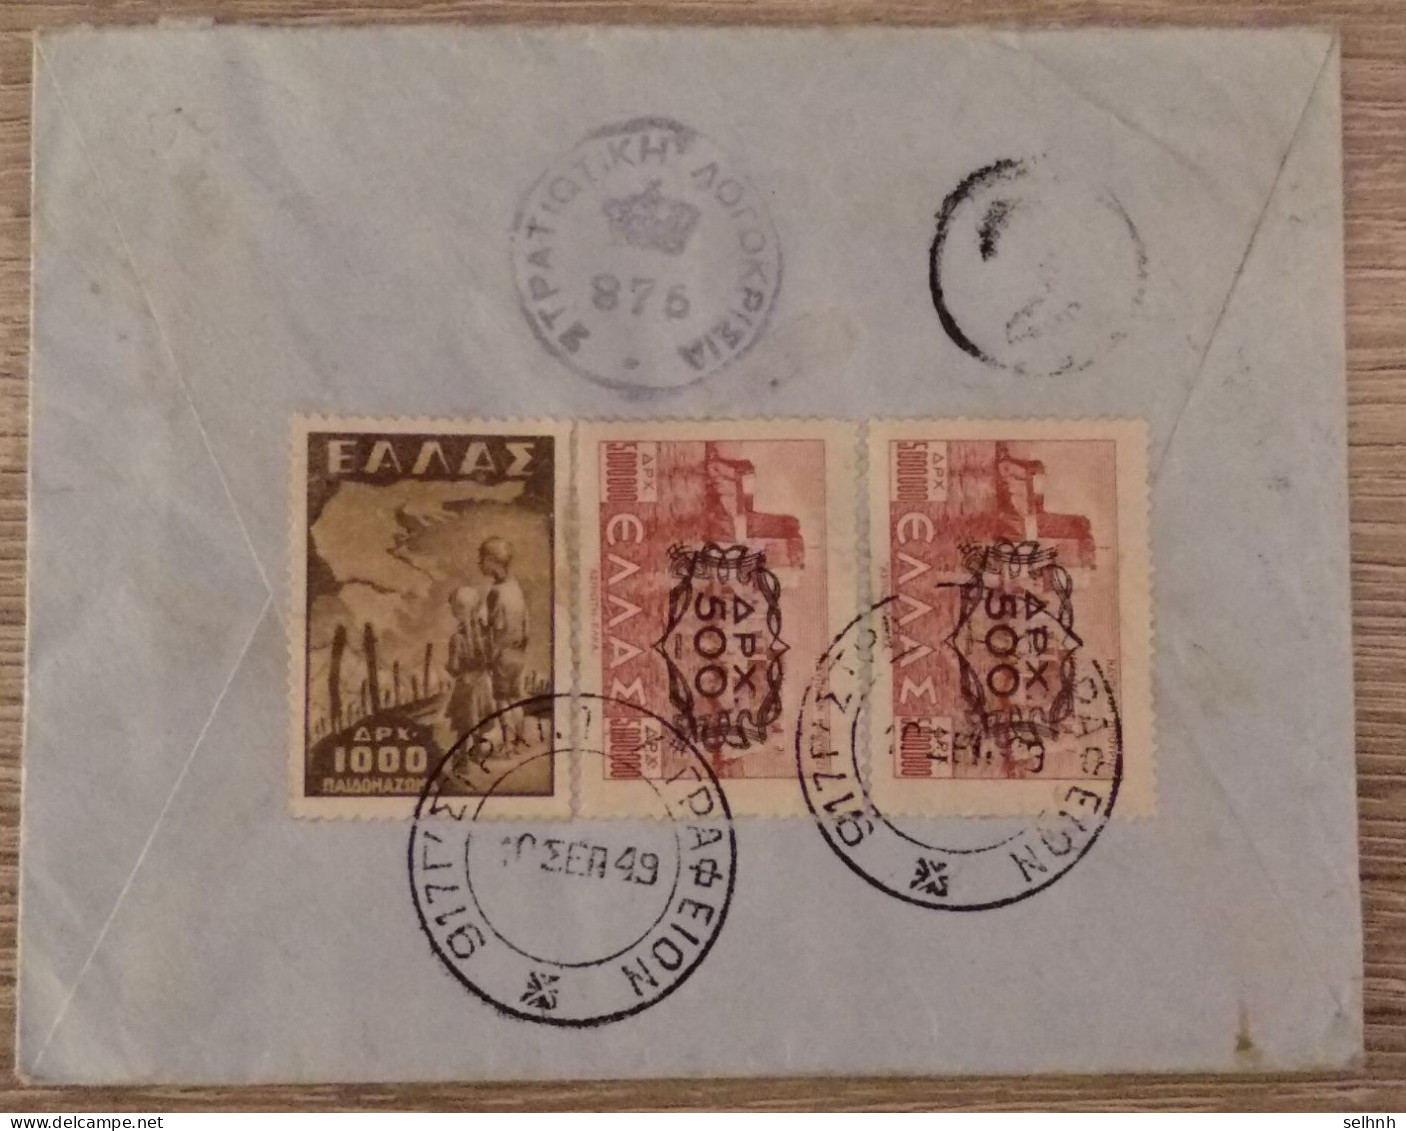 GREECE GRECE COVER TO FRANCE WITH ARMY GENSOR 876. THE STAMPS WERE CANCELED WITH "917 STRAT GRAFEION" - Cartas & Documentos